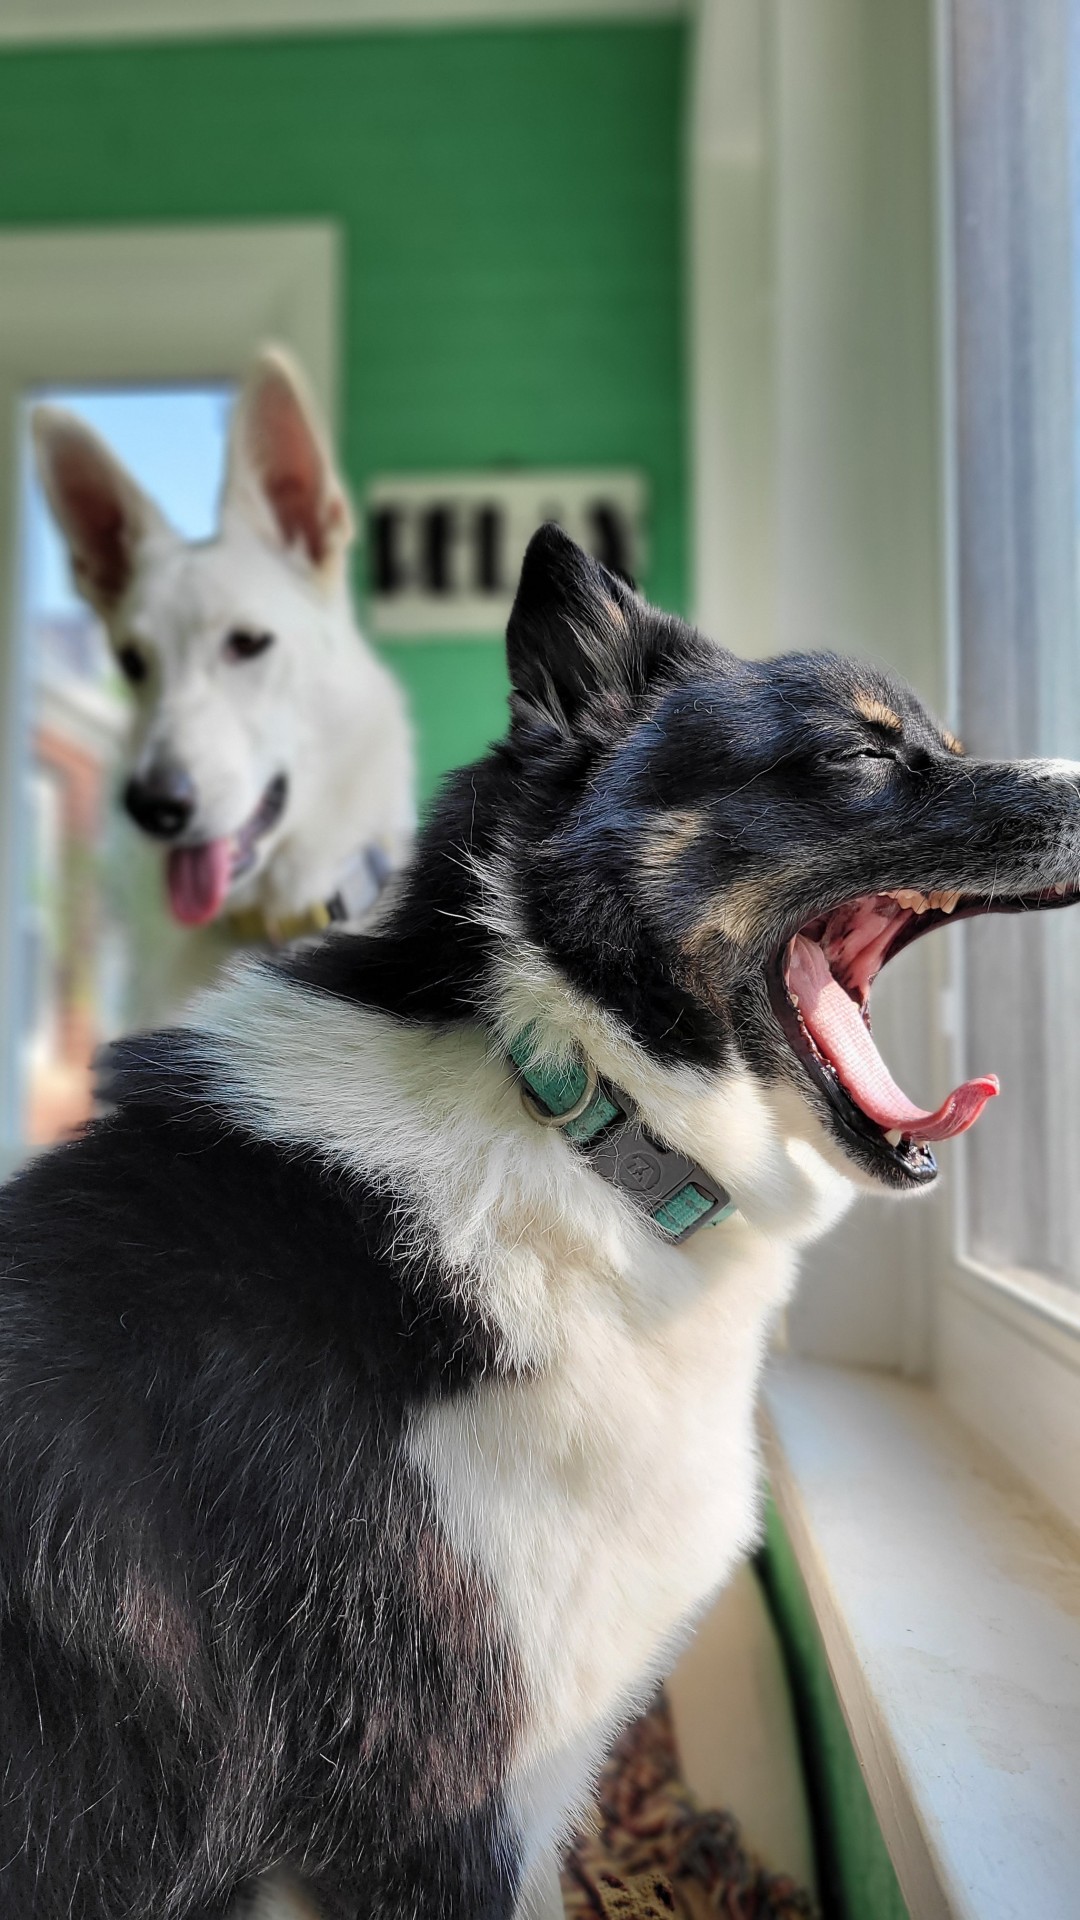 katiiie-lynn:Mornings after work with my babies are my favorite 🥰🐾💖The last shot is hilarious and perfectly captured, Freya mid yawn 🤣🤣🤣👌 Our gorgeous babies 🥰🥰😂 and the perfect shot of Freya